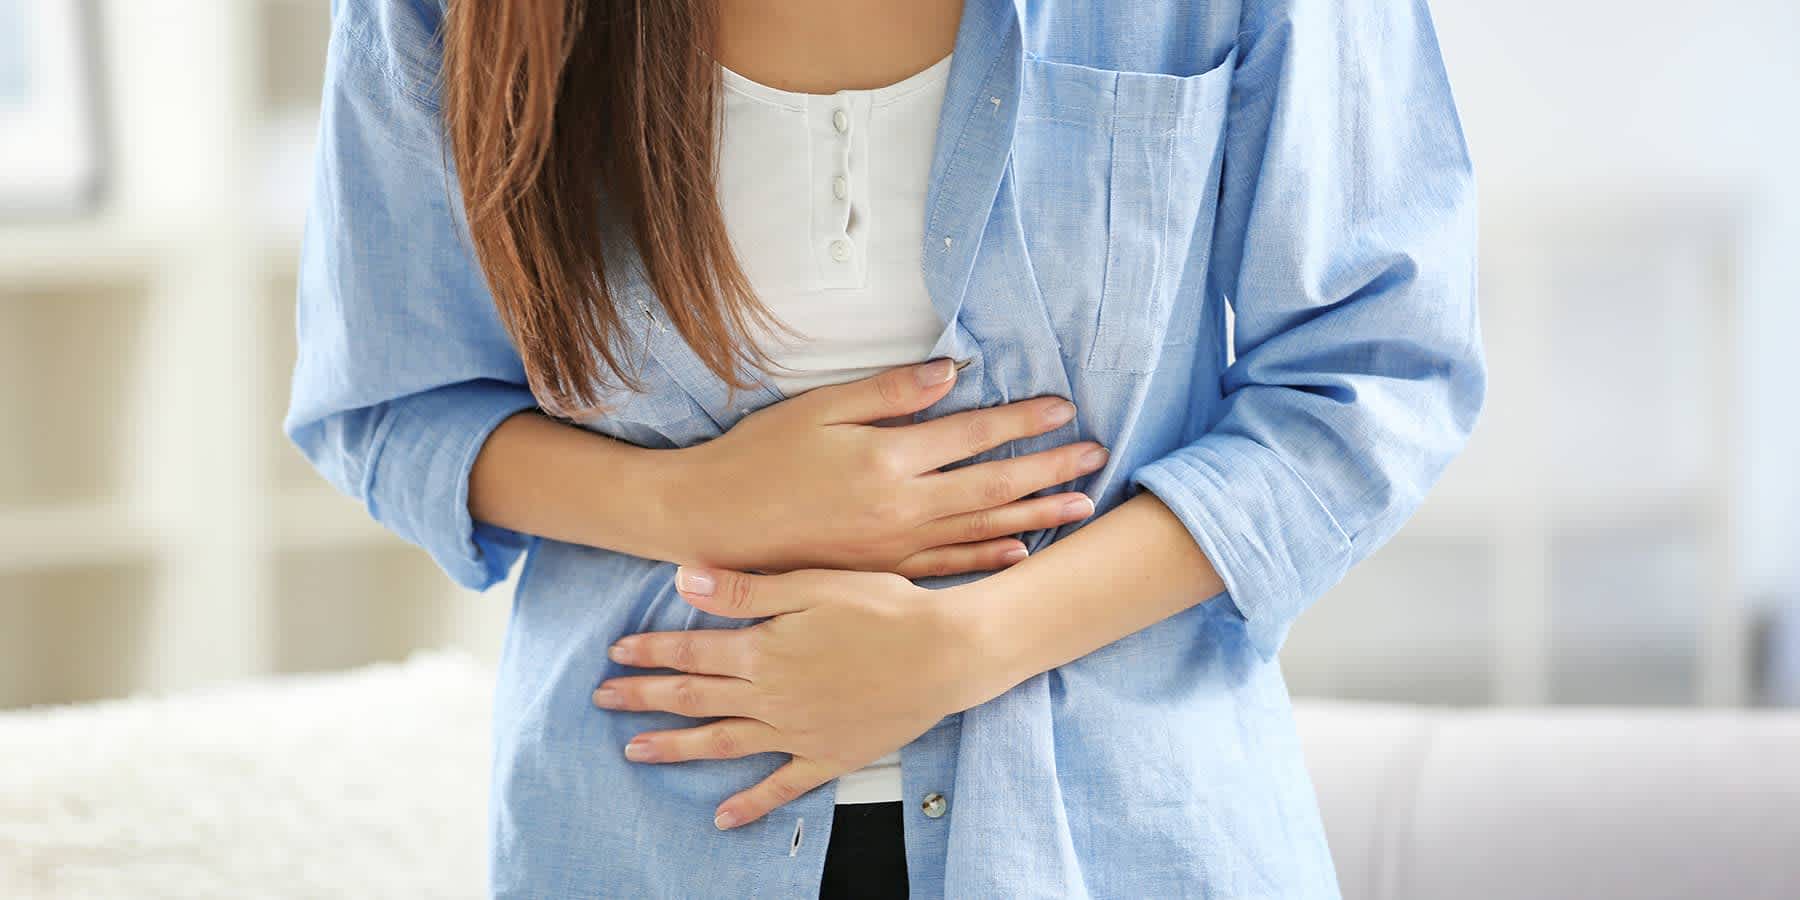 Urinary Tract Infection in Women: Signs, Causes and Treatment